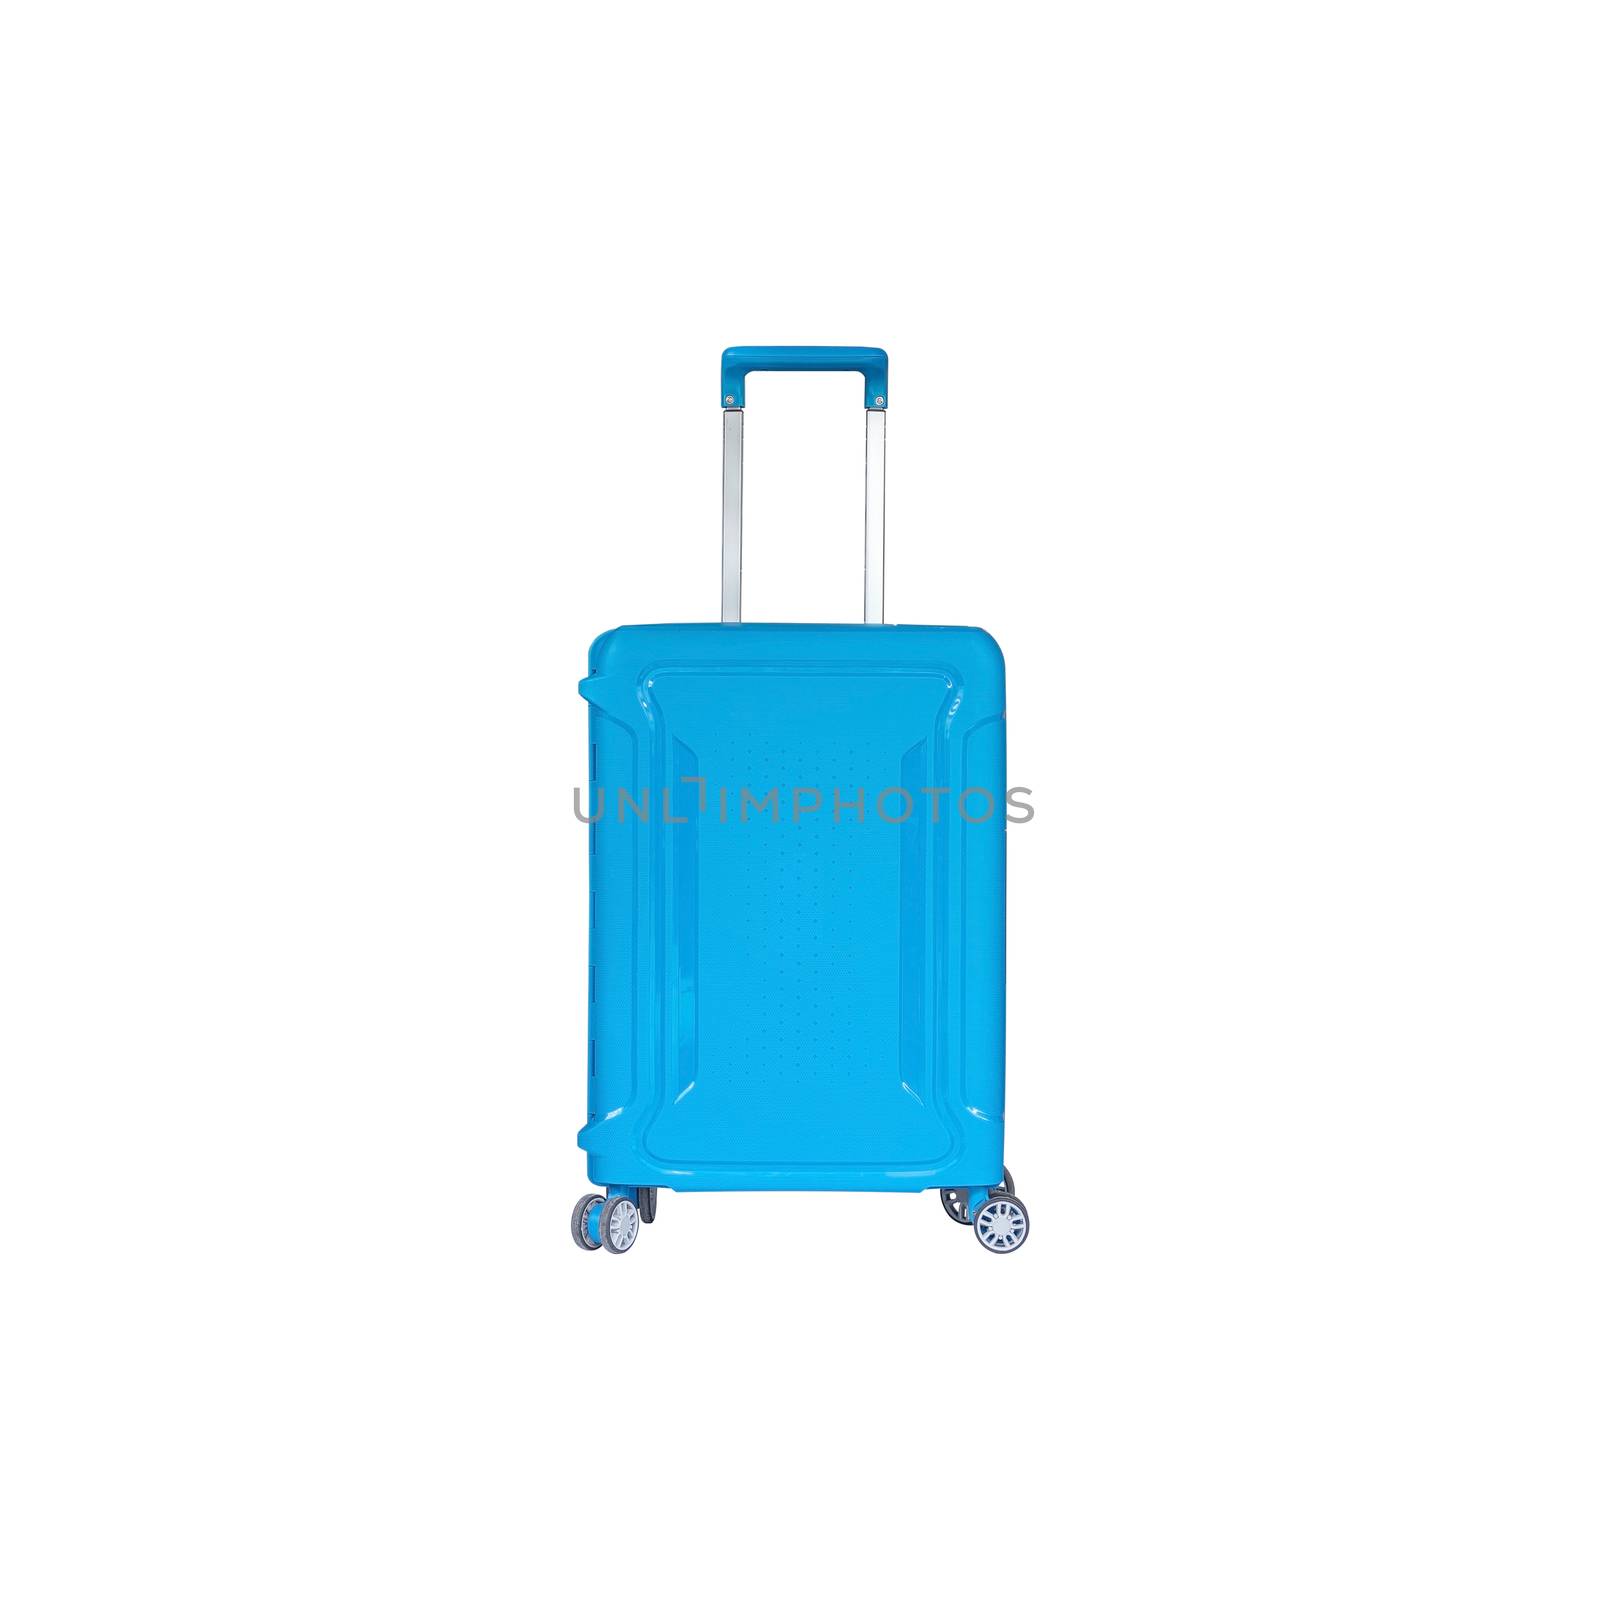 Beautiful blue color travel luggage isolated on white background, with clipping path.